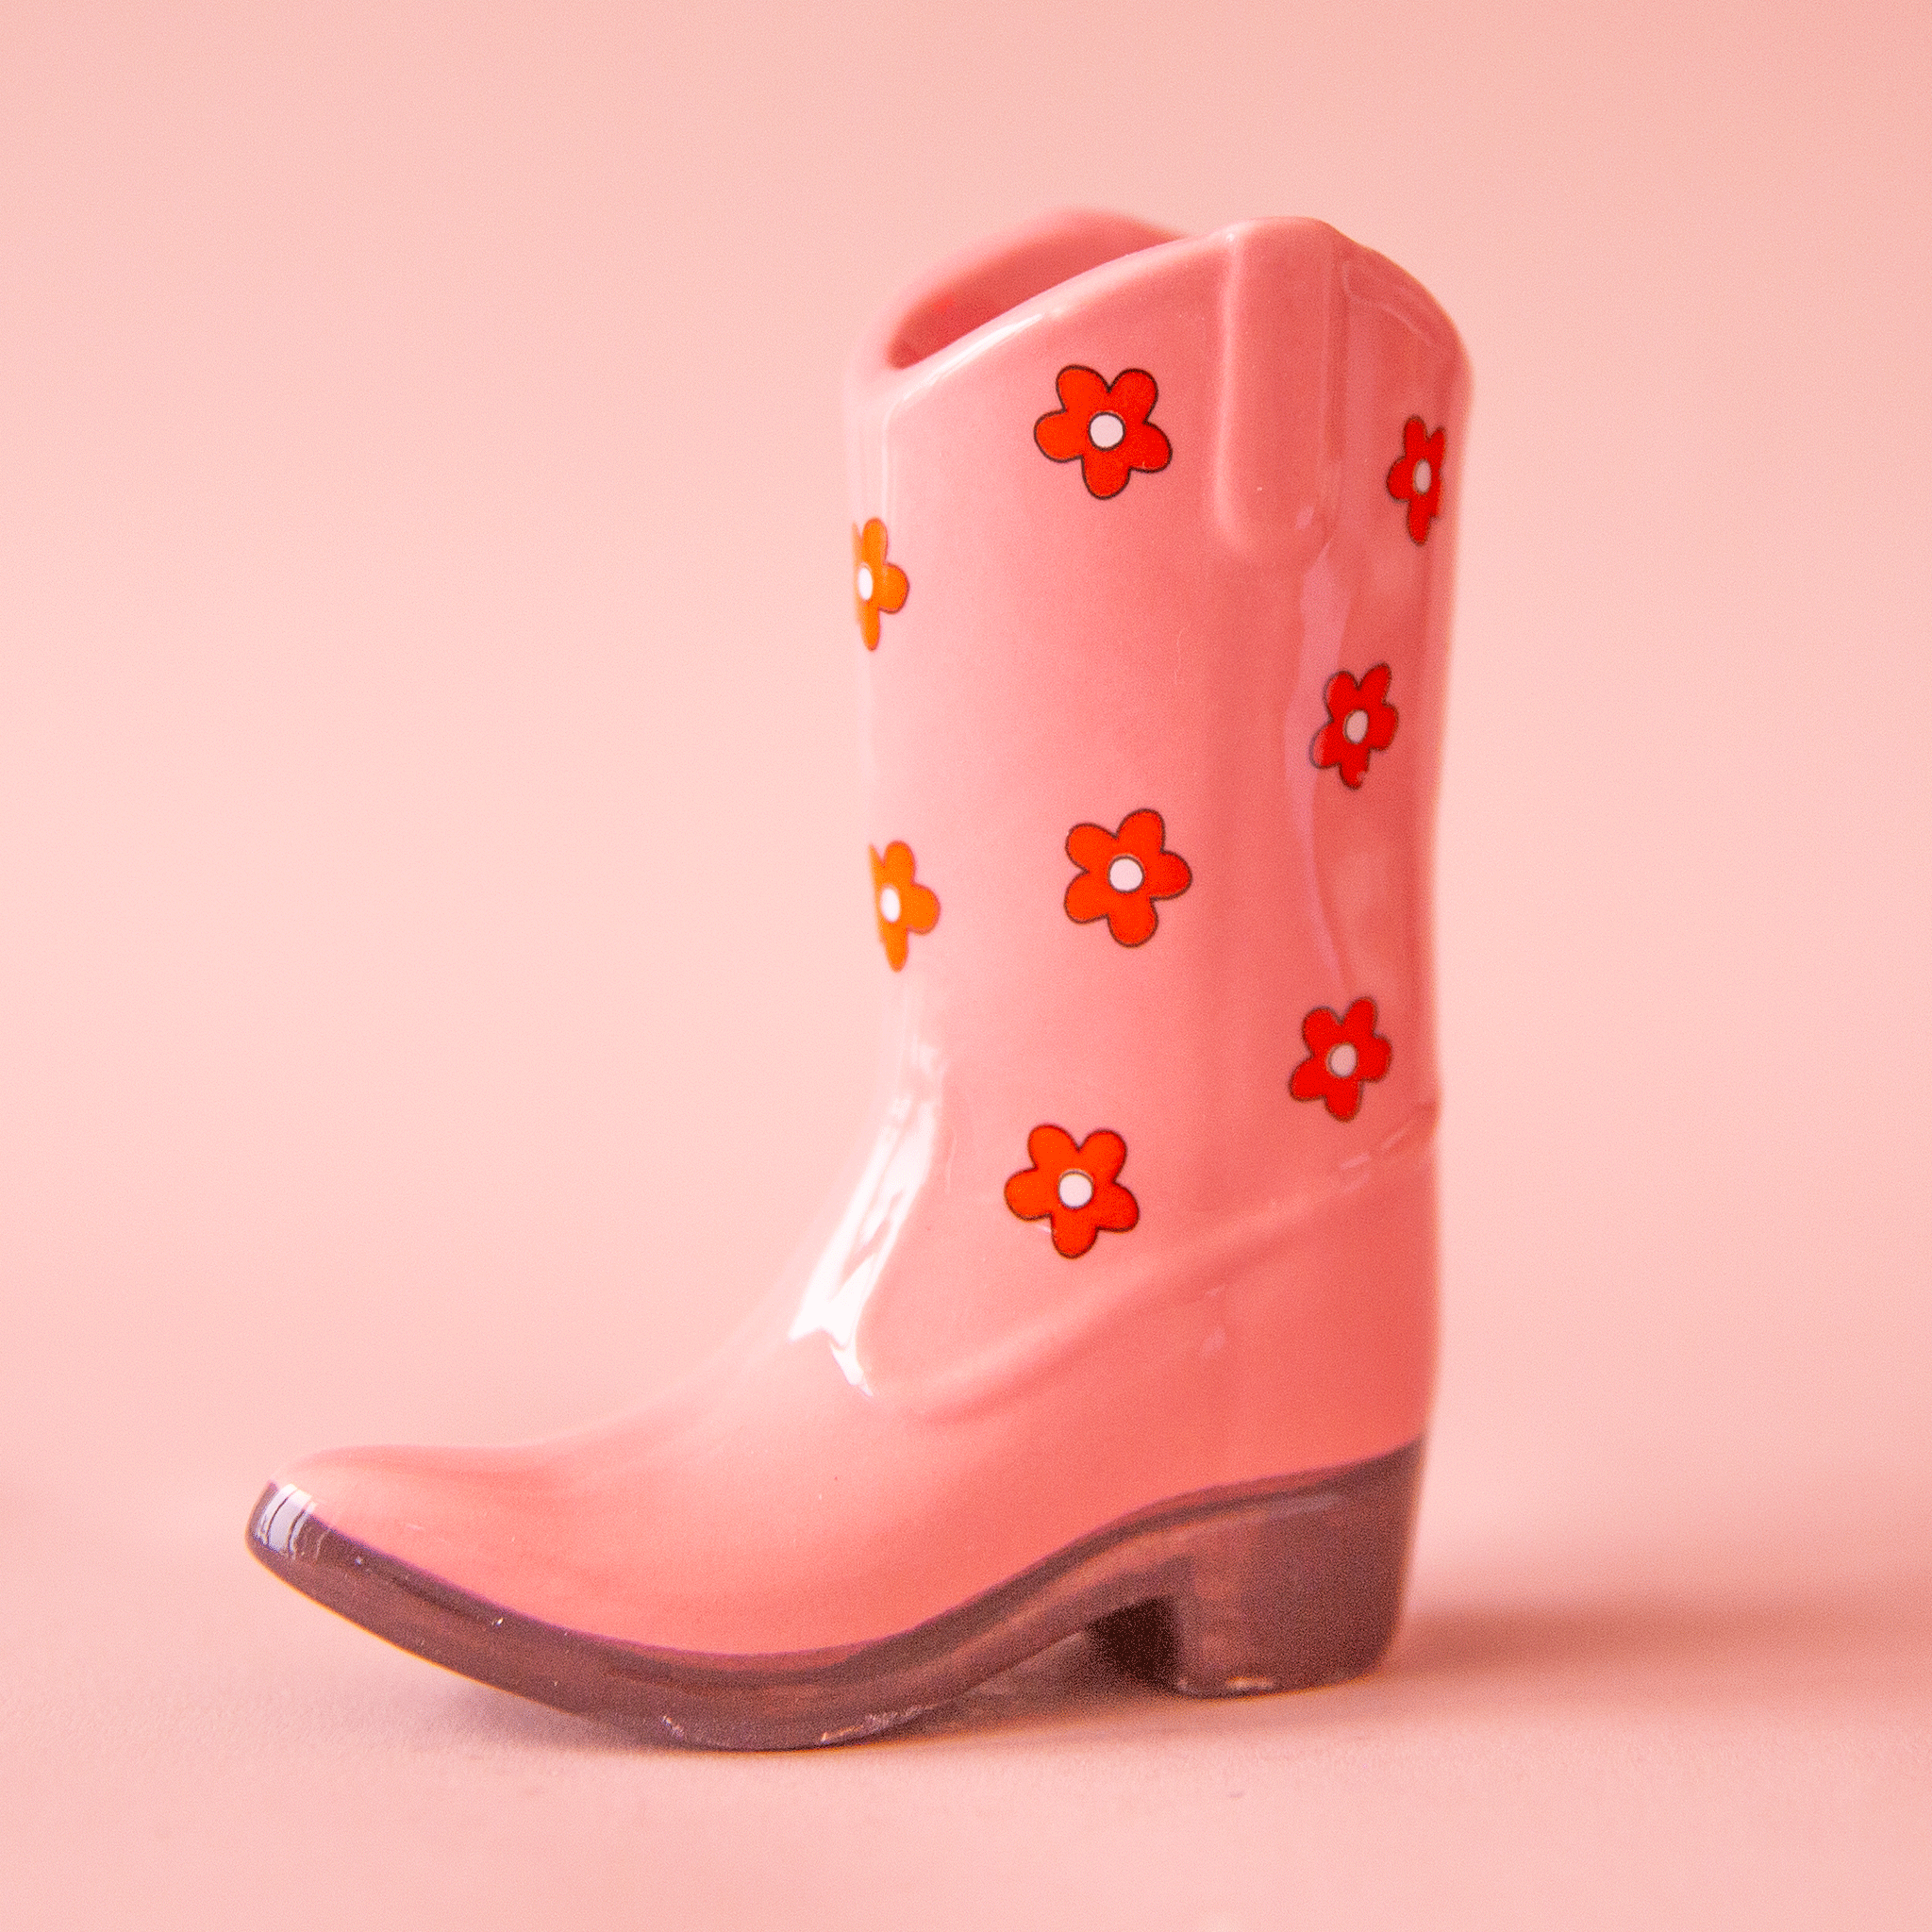 On a pink background is a pink cowboy boot shaped vase with a red and white daisy print on it.